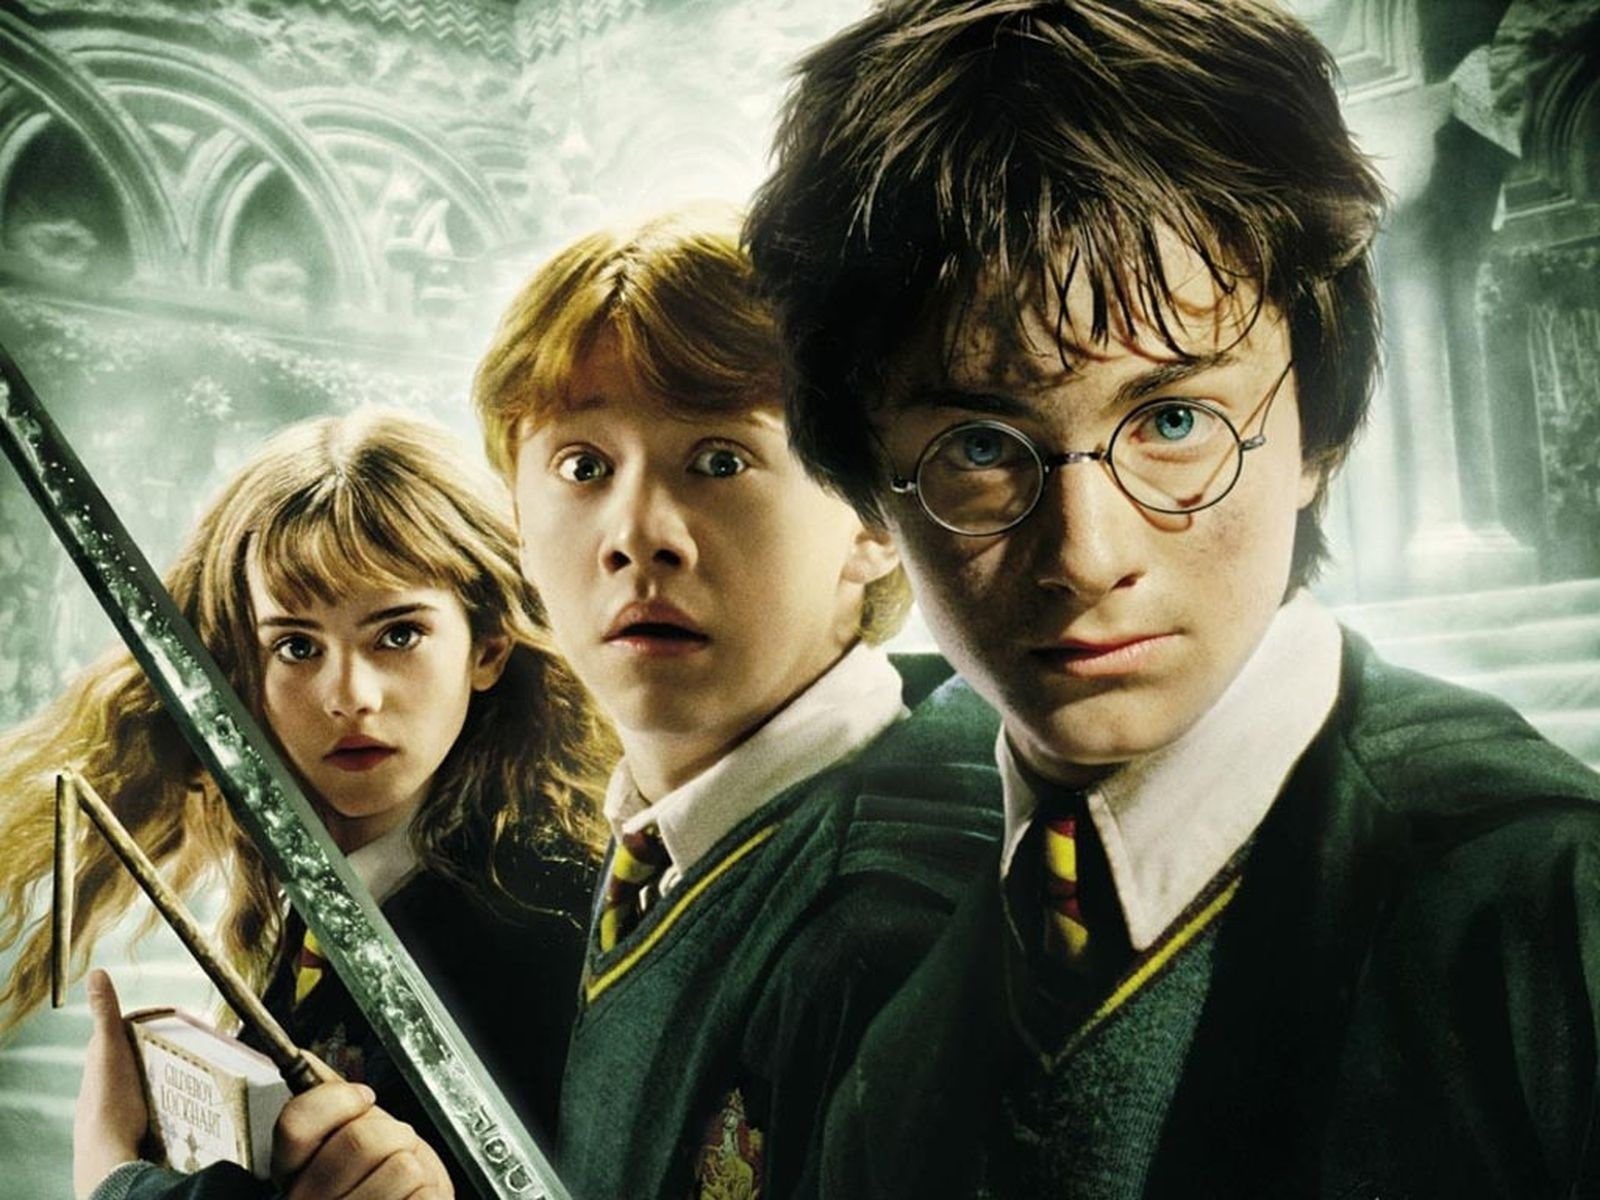 Harry potter and the chamber of secrets, Ronald weasley, Hermione granger